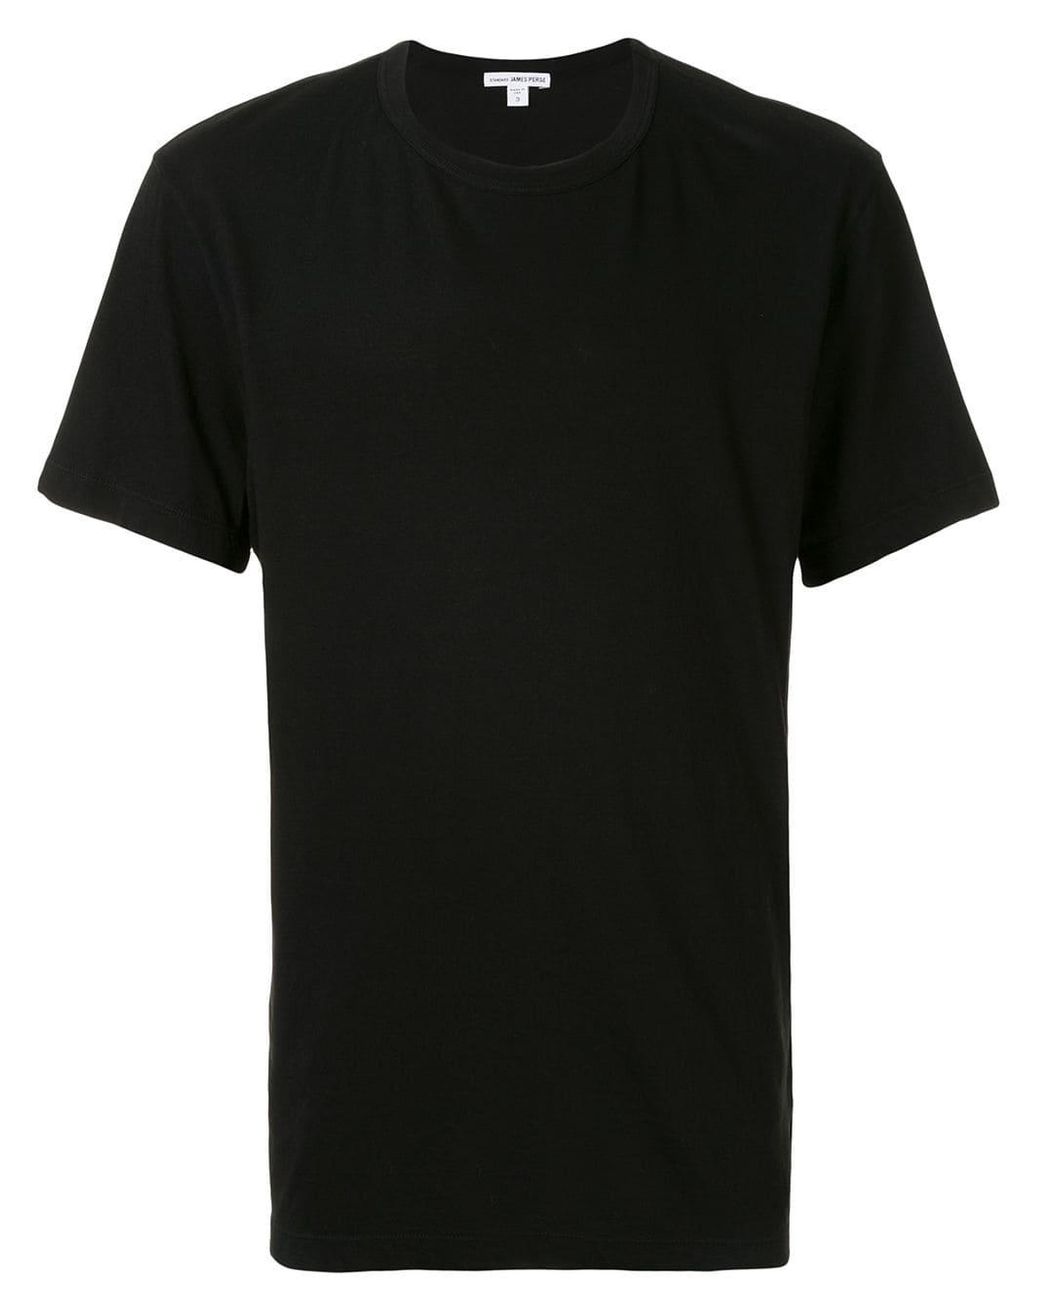 James Perse Cotton Slim-fit T-shirt in Black for Men - Save 11% - Lyst